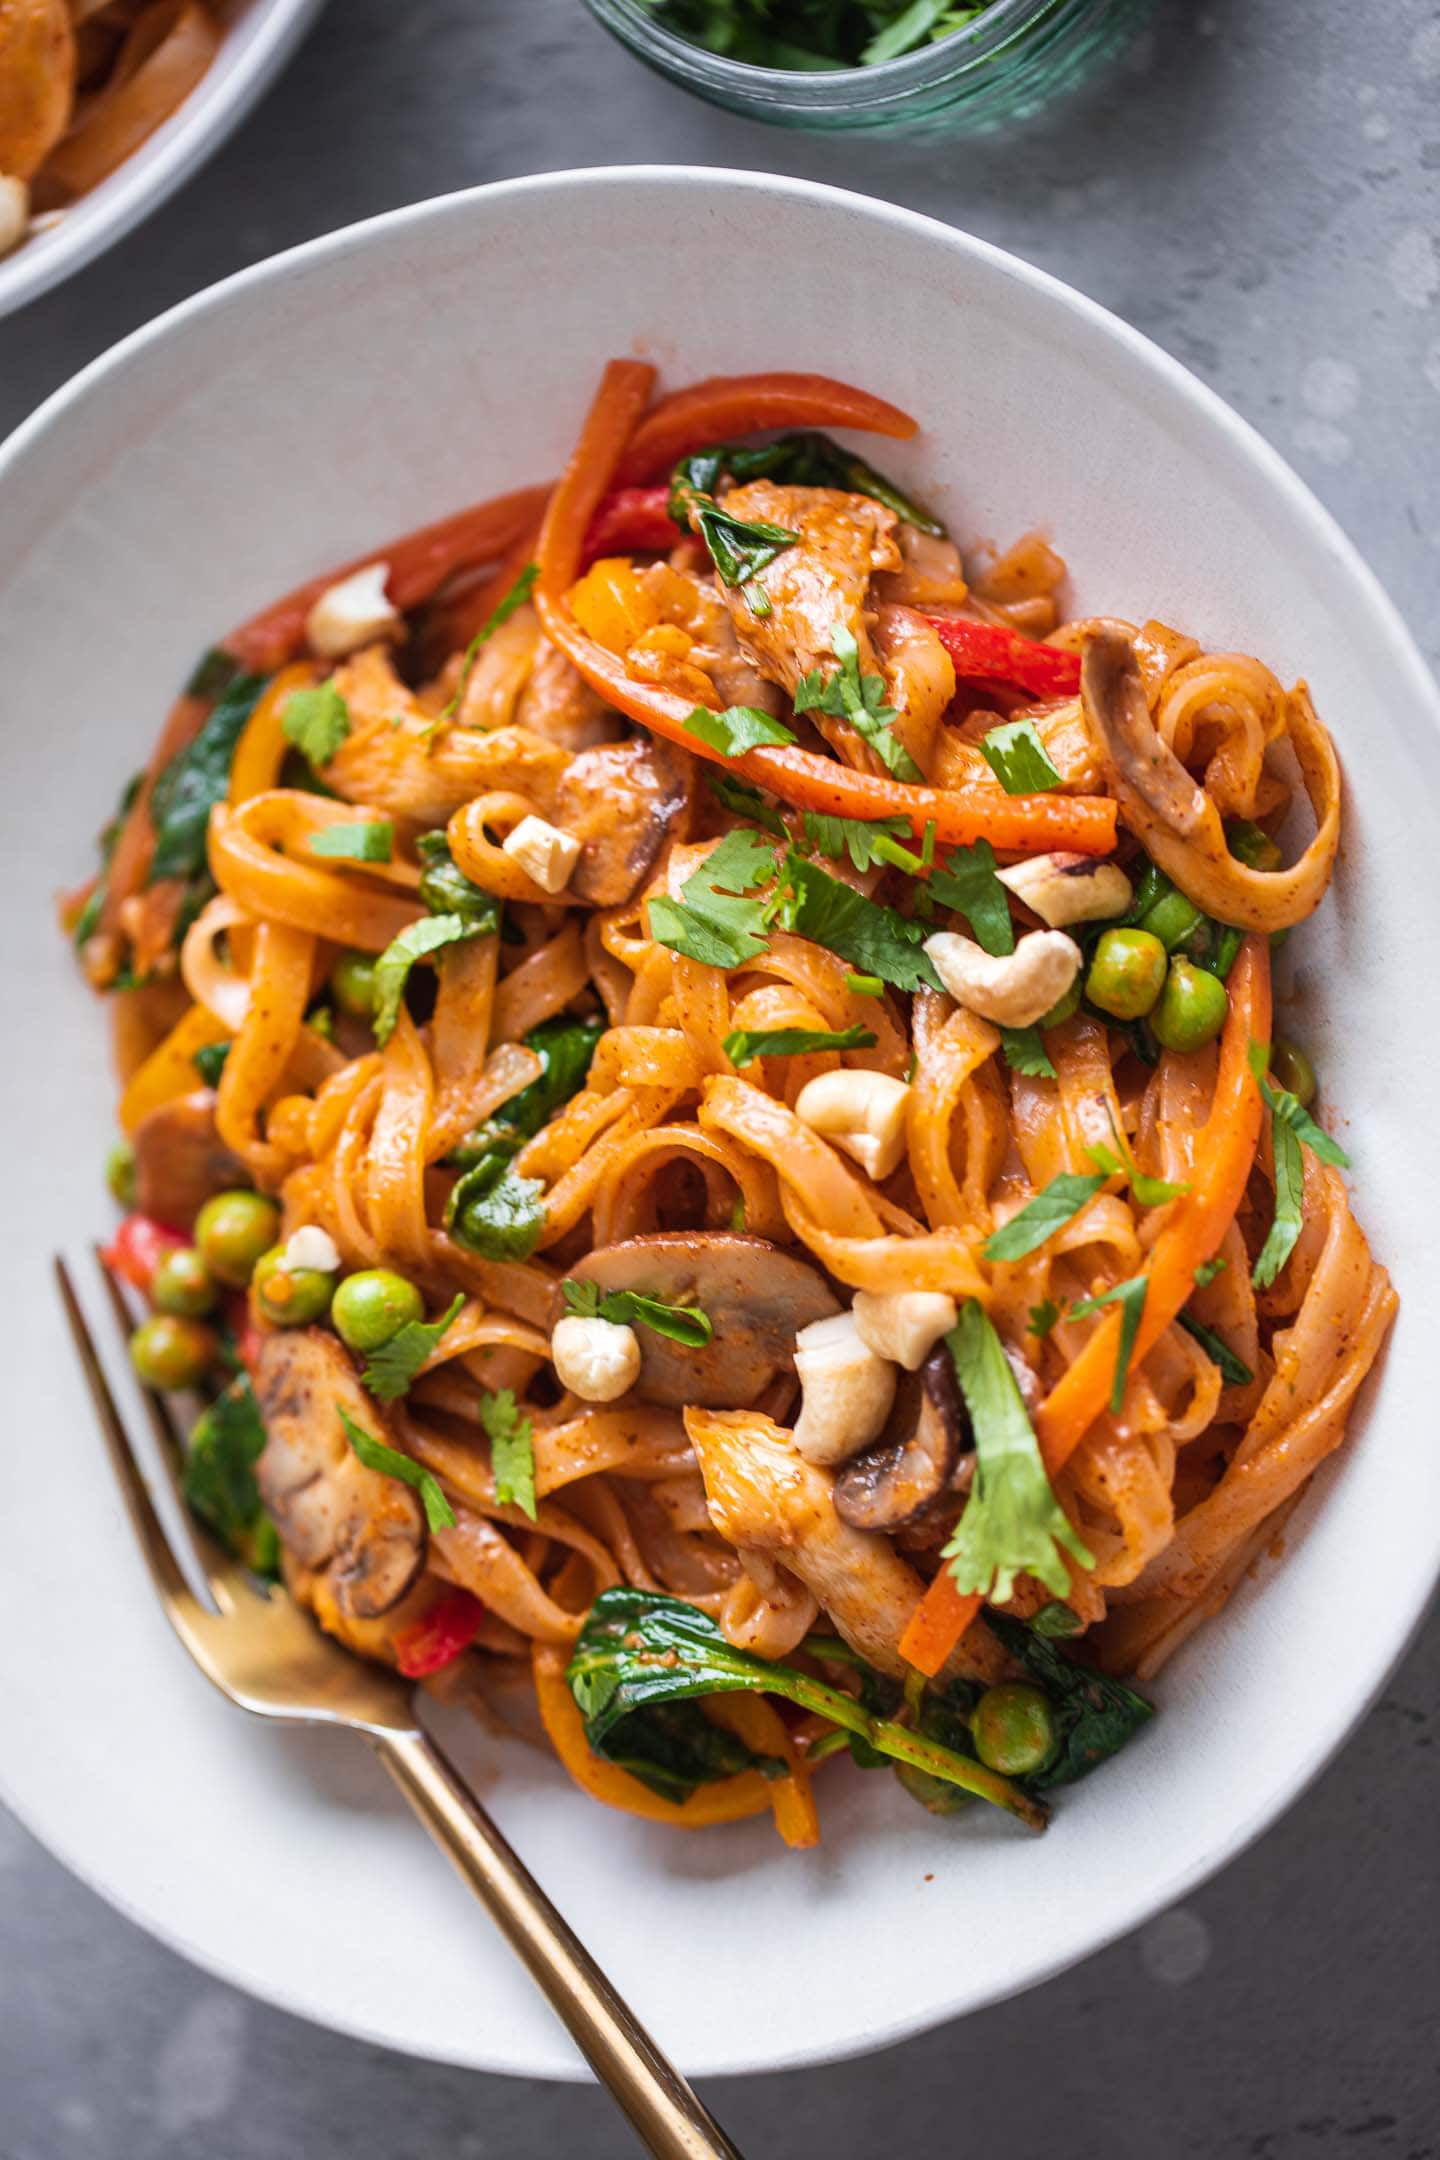 Rice noodle stir-fry with vegetables